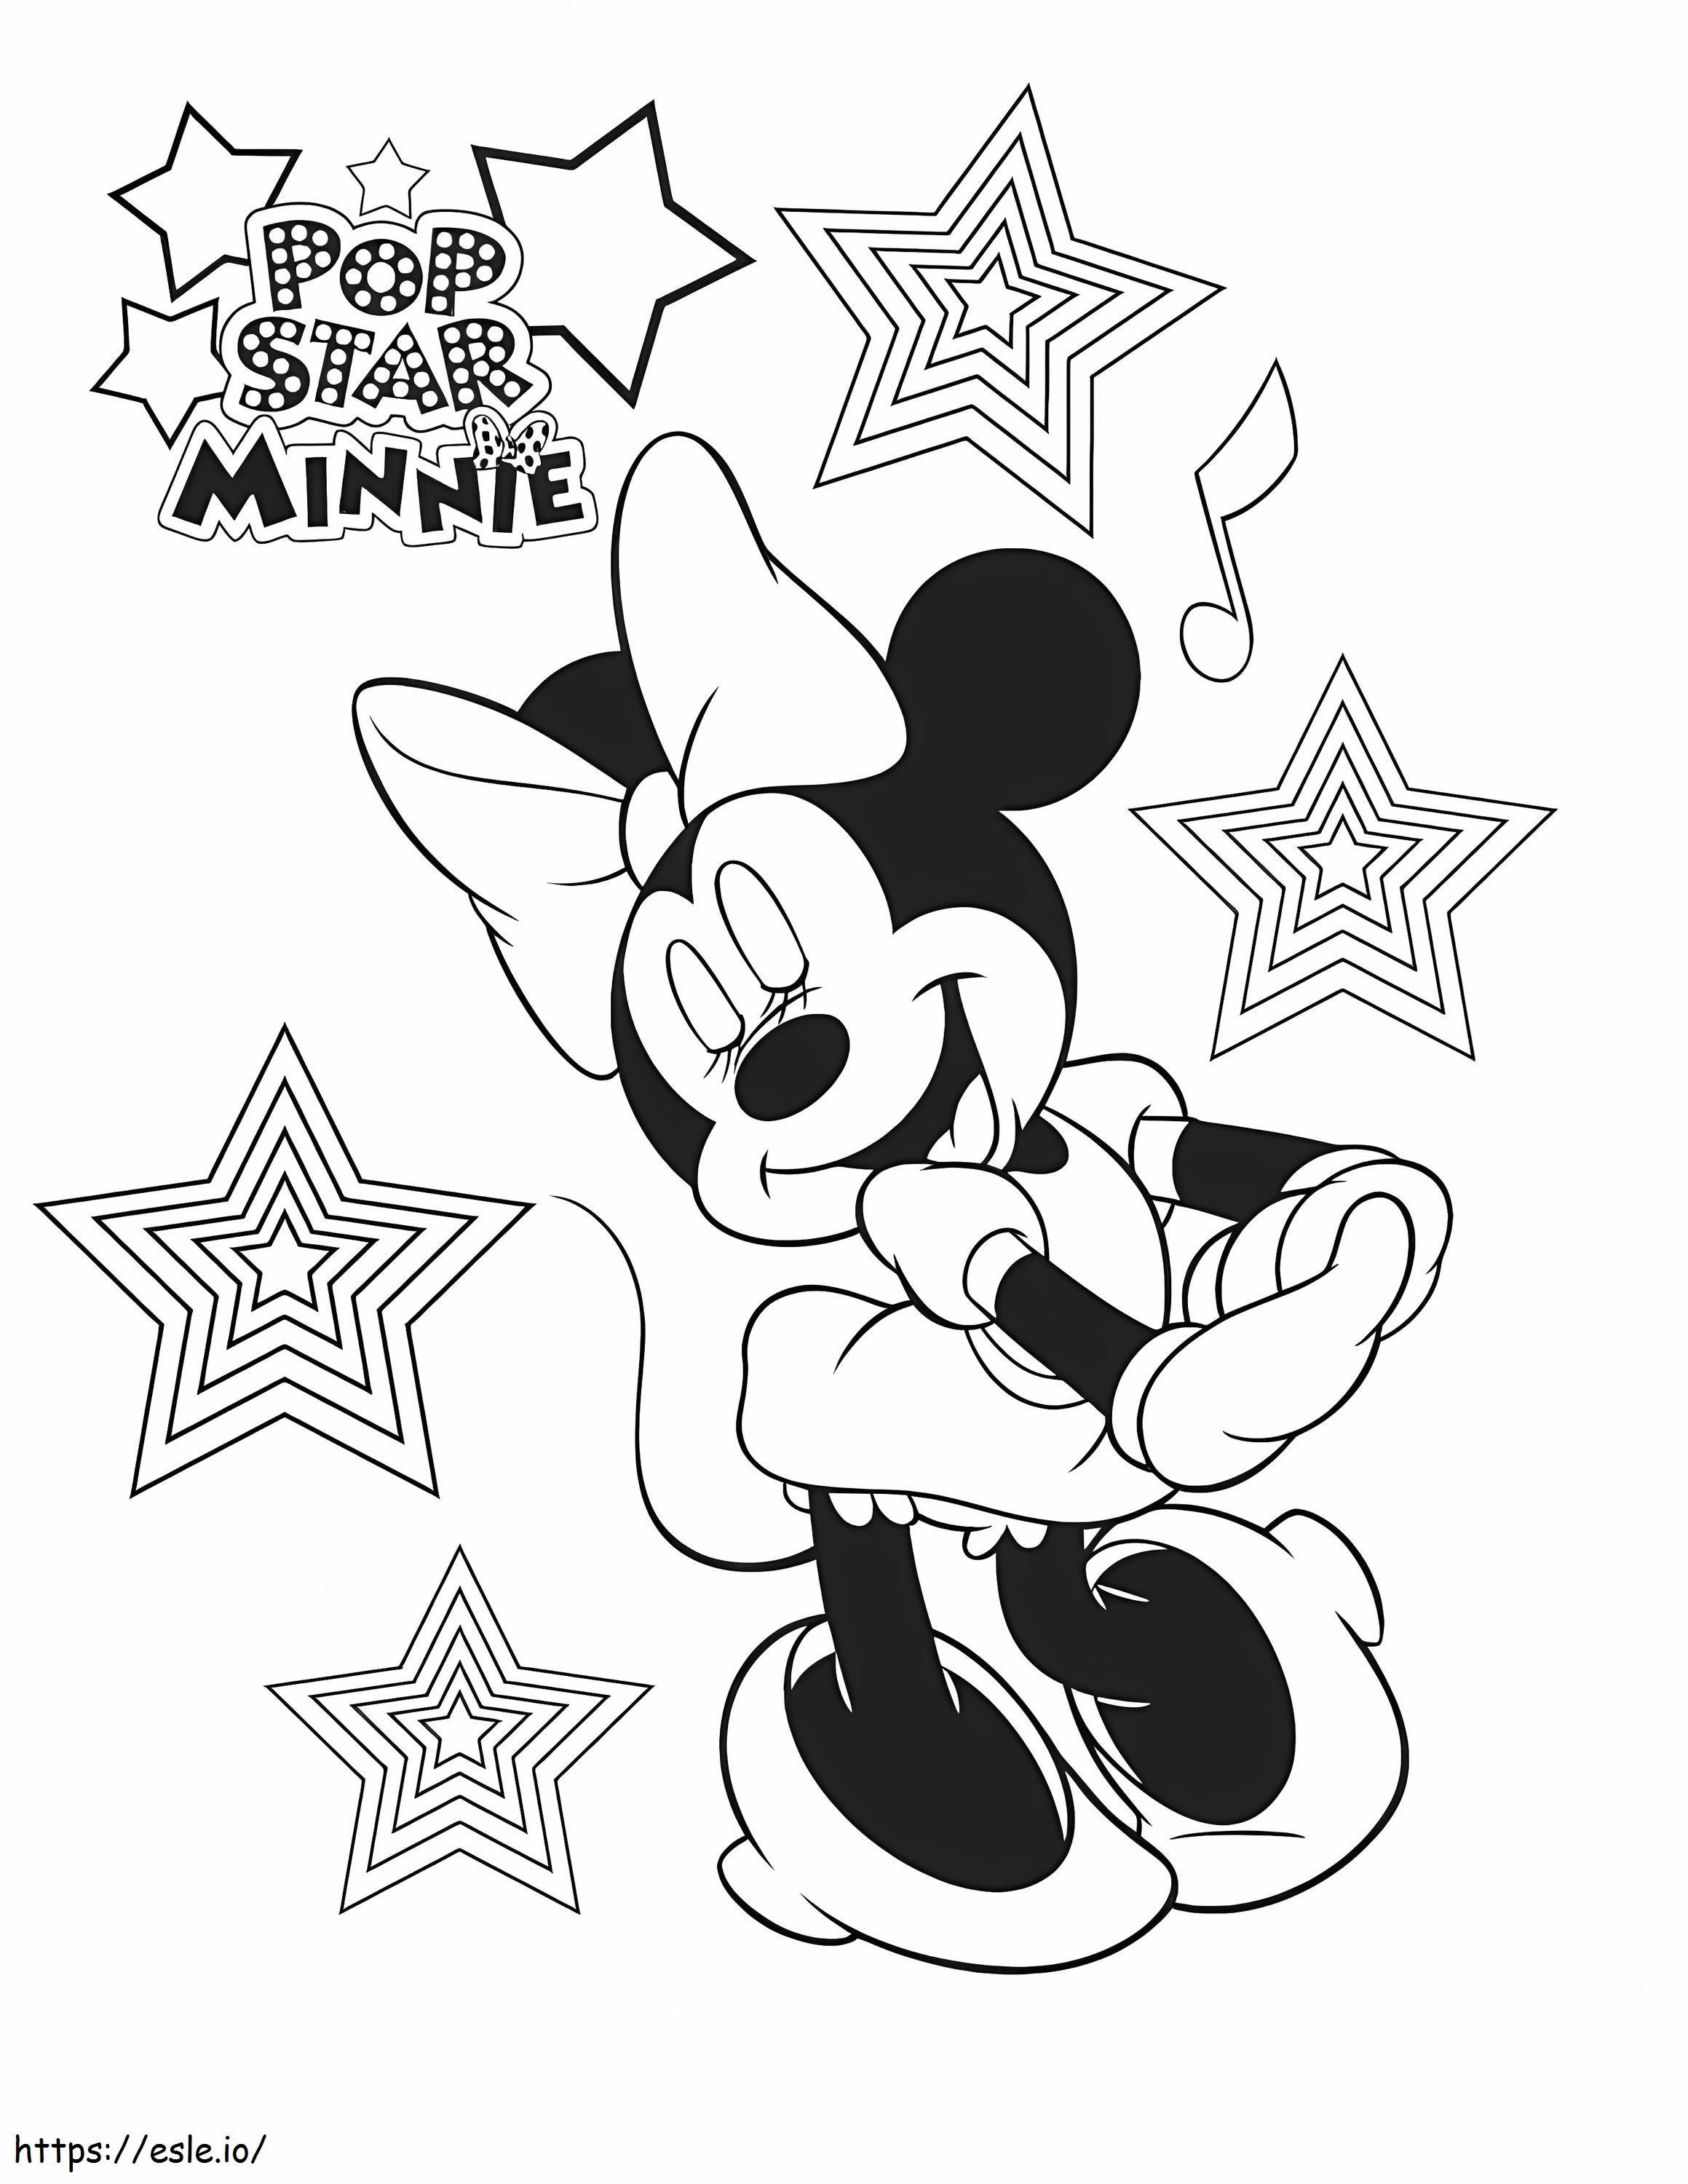 Pop Star Minnie Mouse coloring page